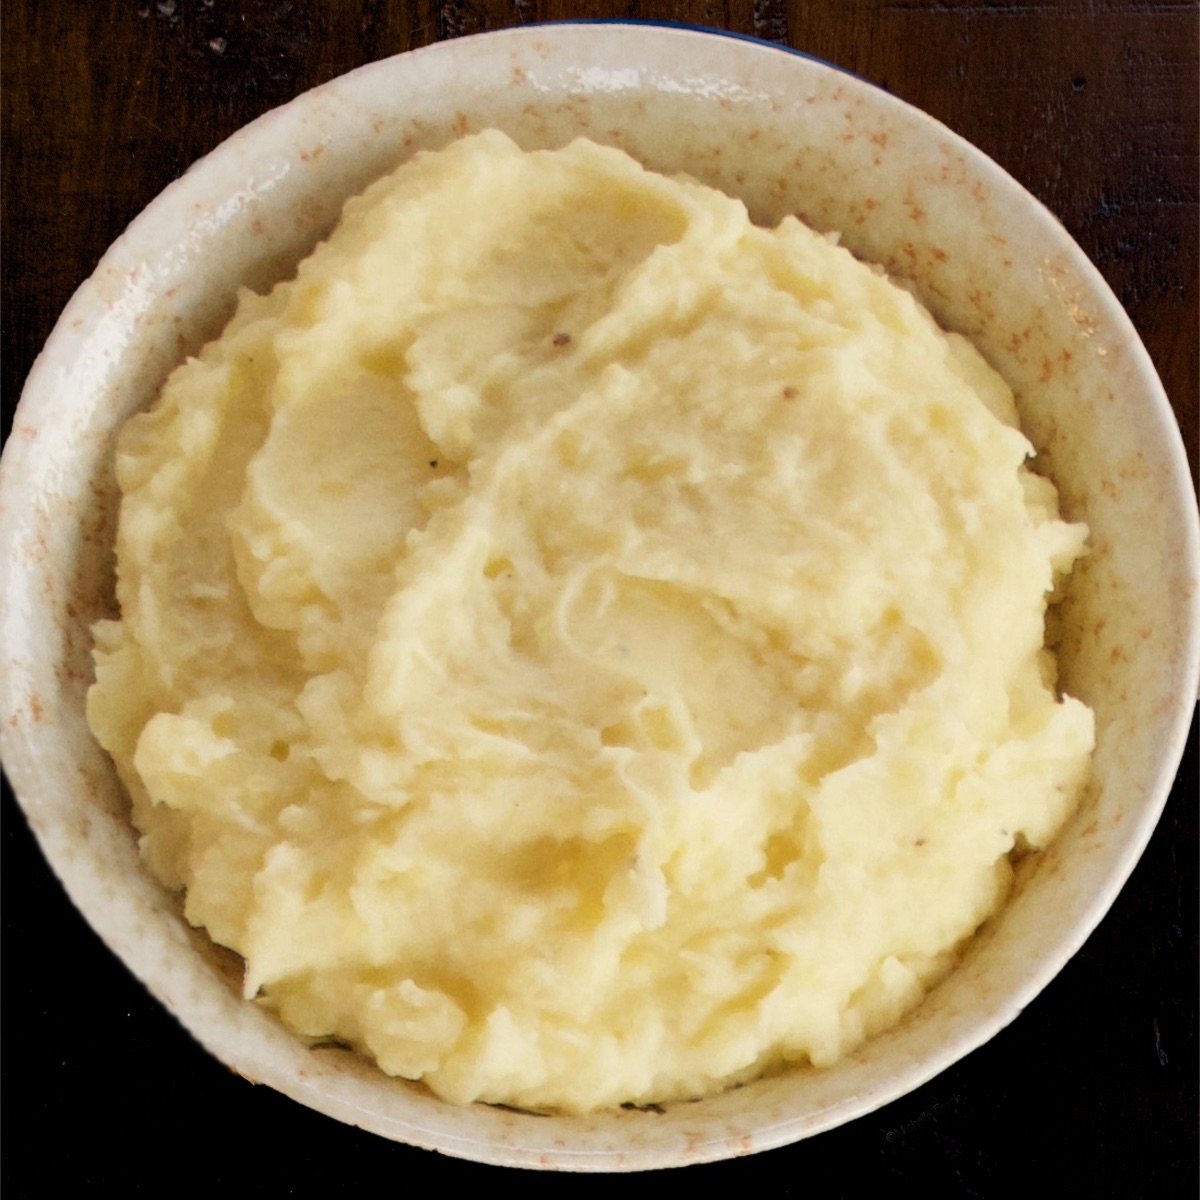 Meal-Prep Creamy Mashed Potatoes in a ceramic bowl set on a dark, wooden table.